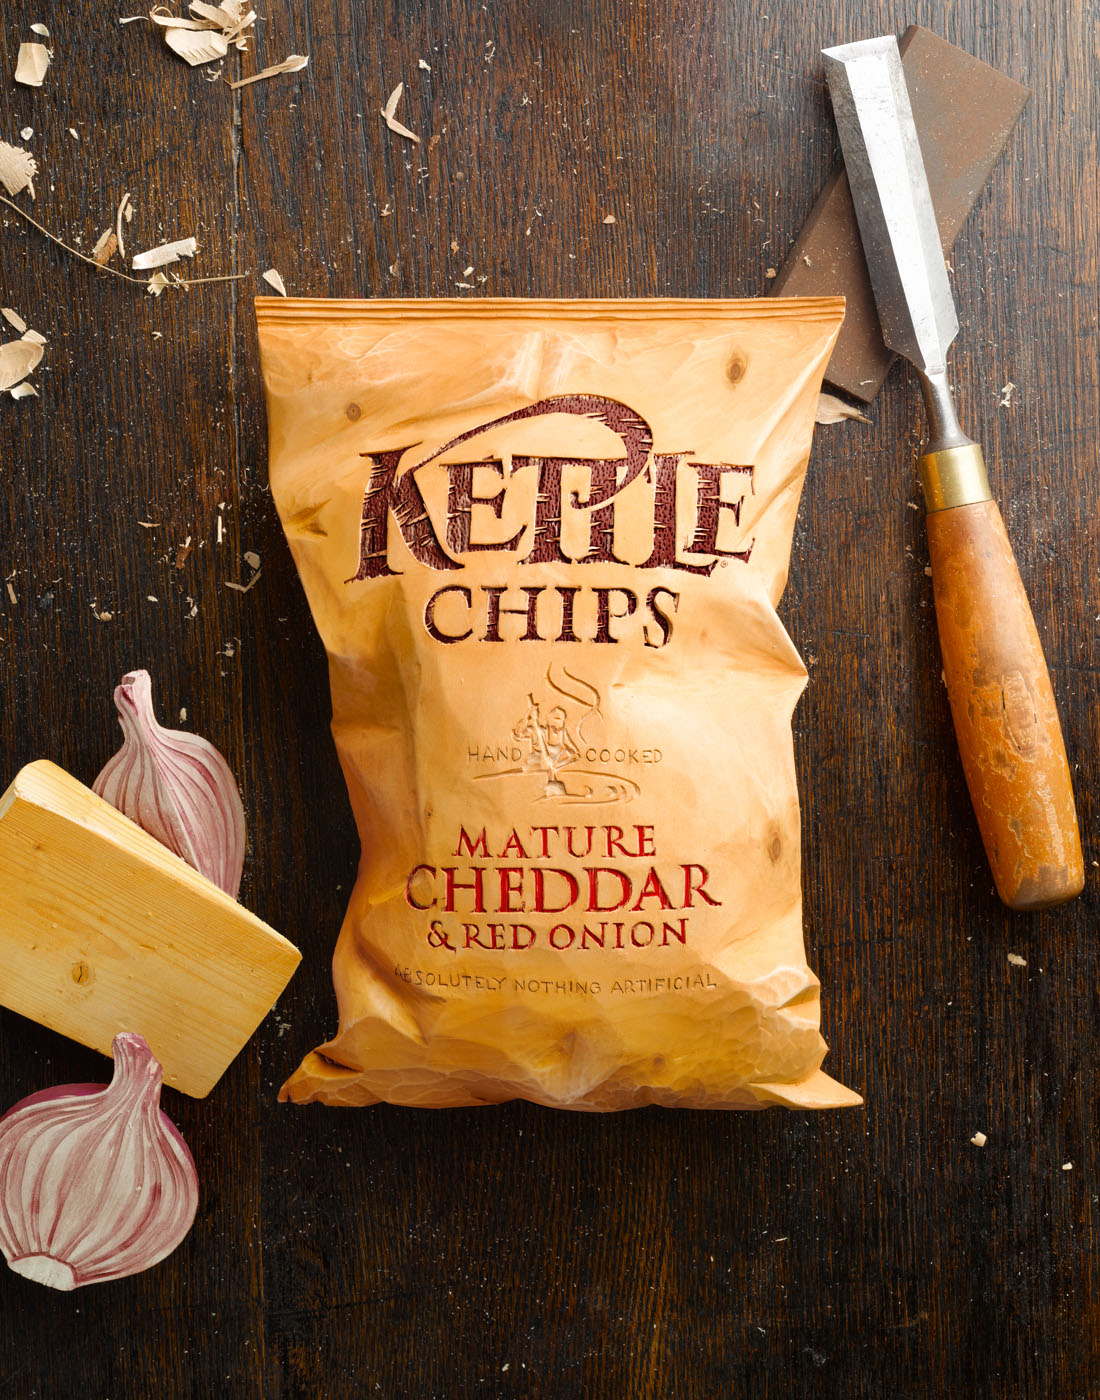 Wooden crisp packet carving in studio by Alexander Kent London based still life and product photographer.